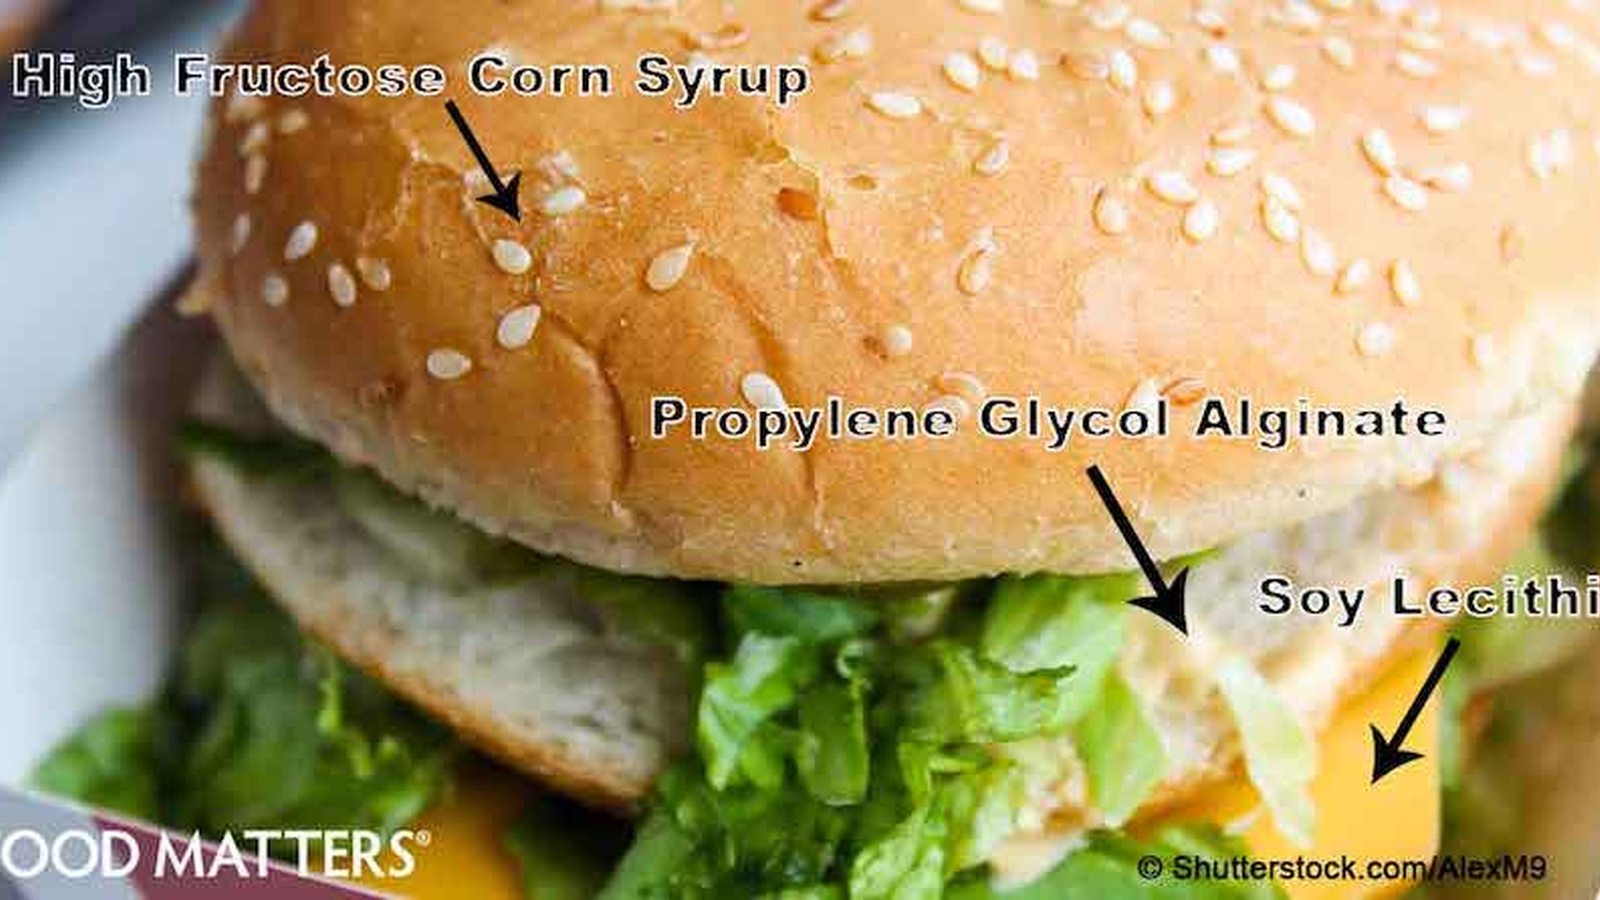 What's Really In A Big Mac?